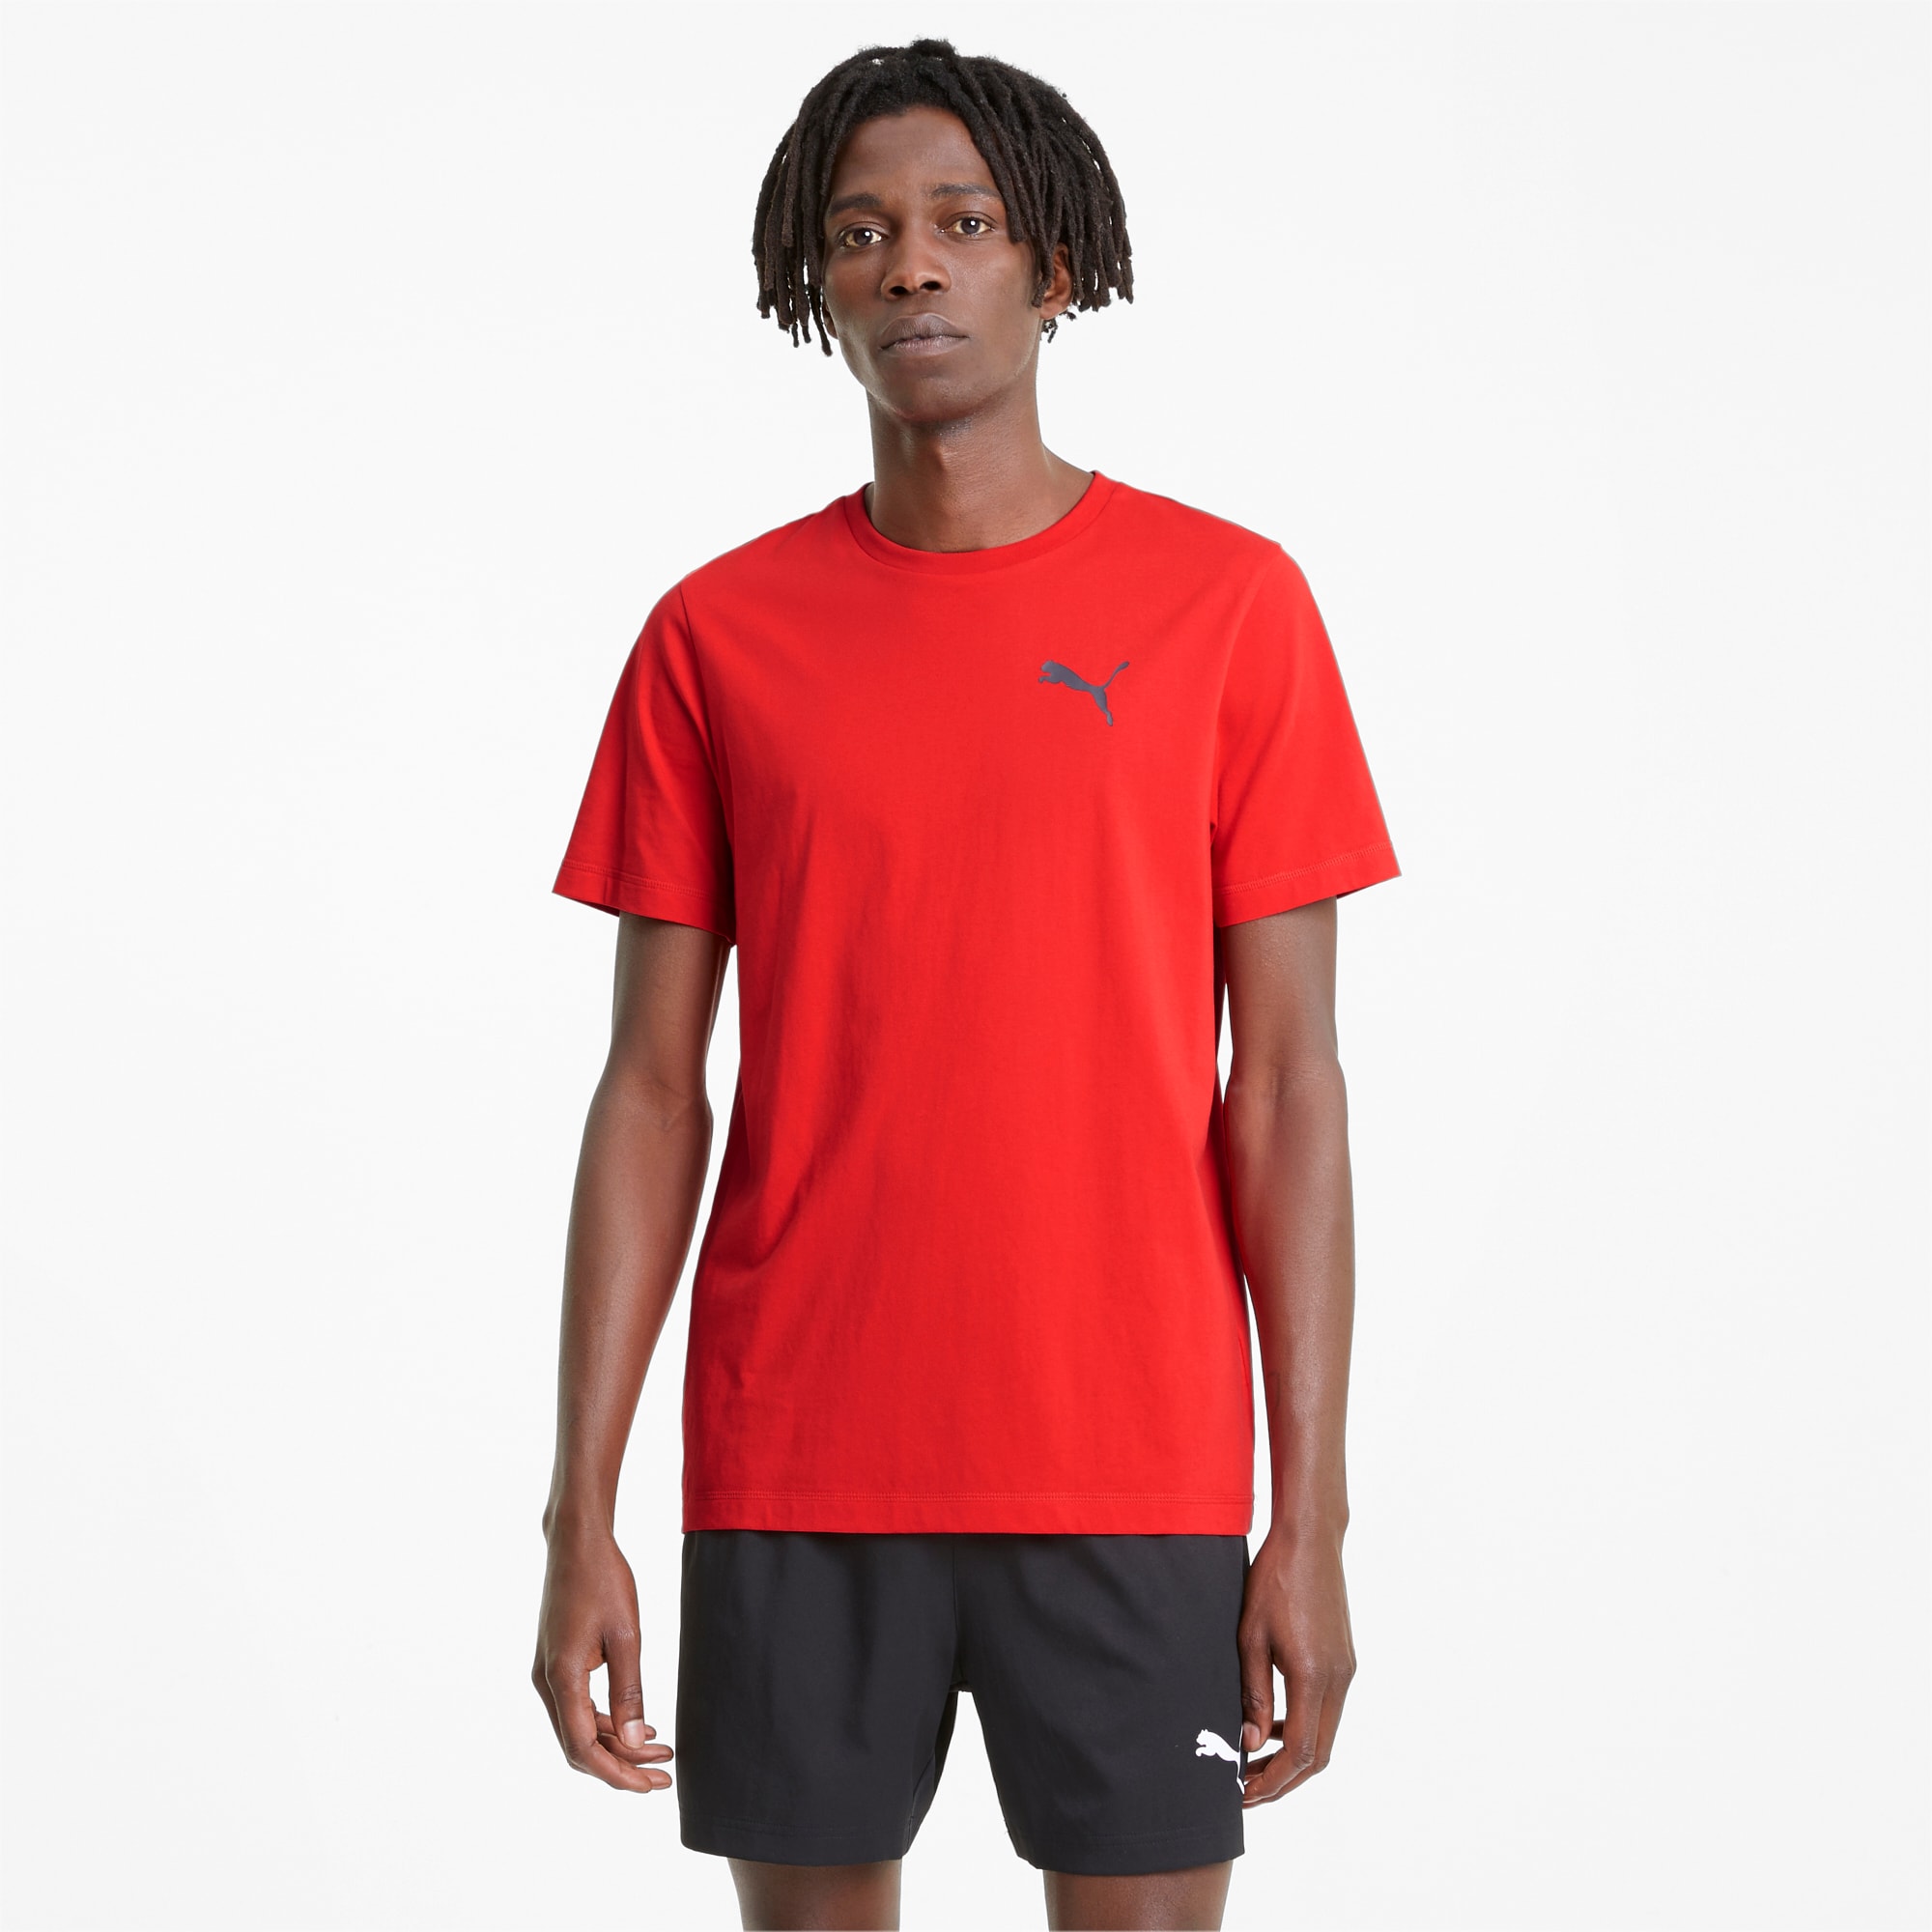 PUMA Active Soft Men's T-Shirt, High Risk Red, Size XL, Clothing